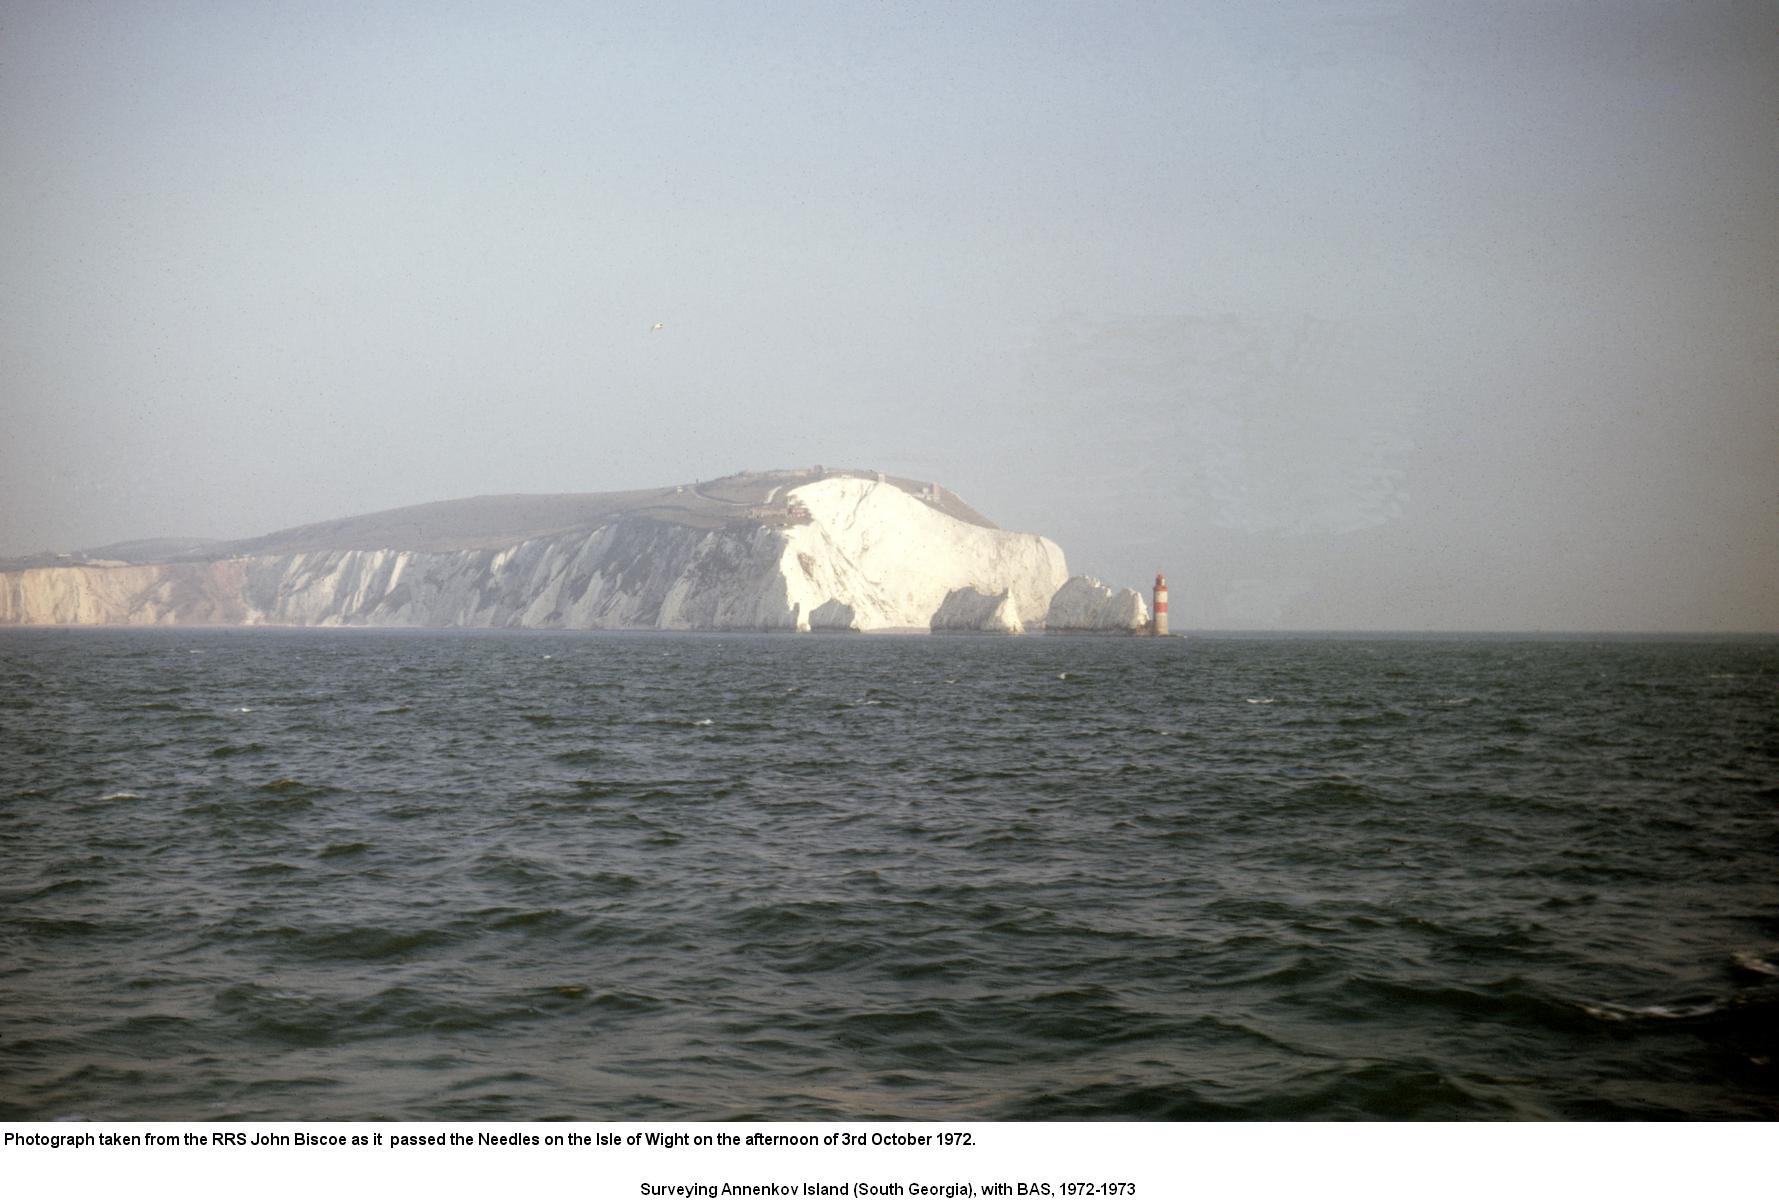 Passing the Needles, Isle of Wight, afternoon of 3rd October 1972.